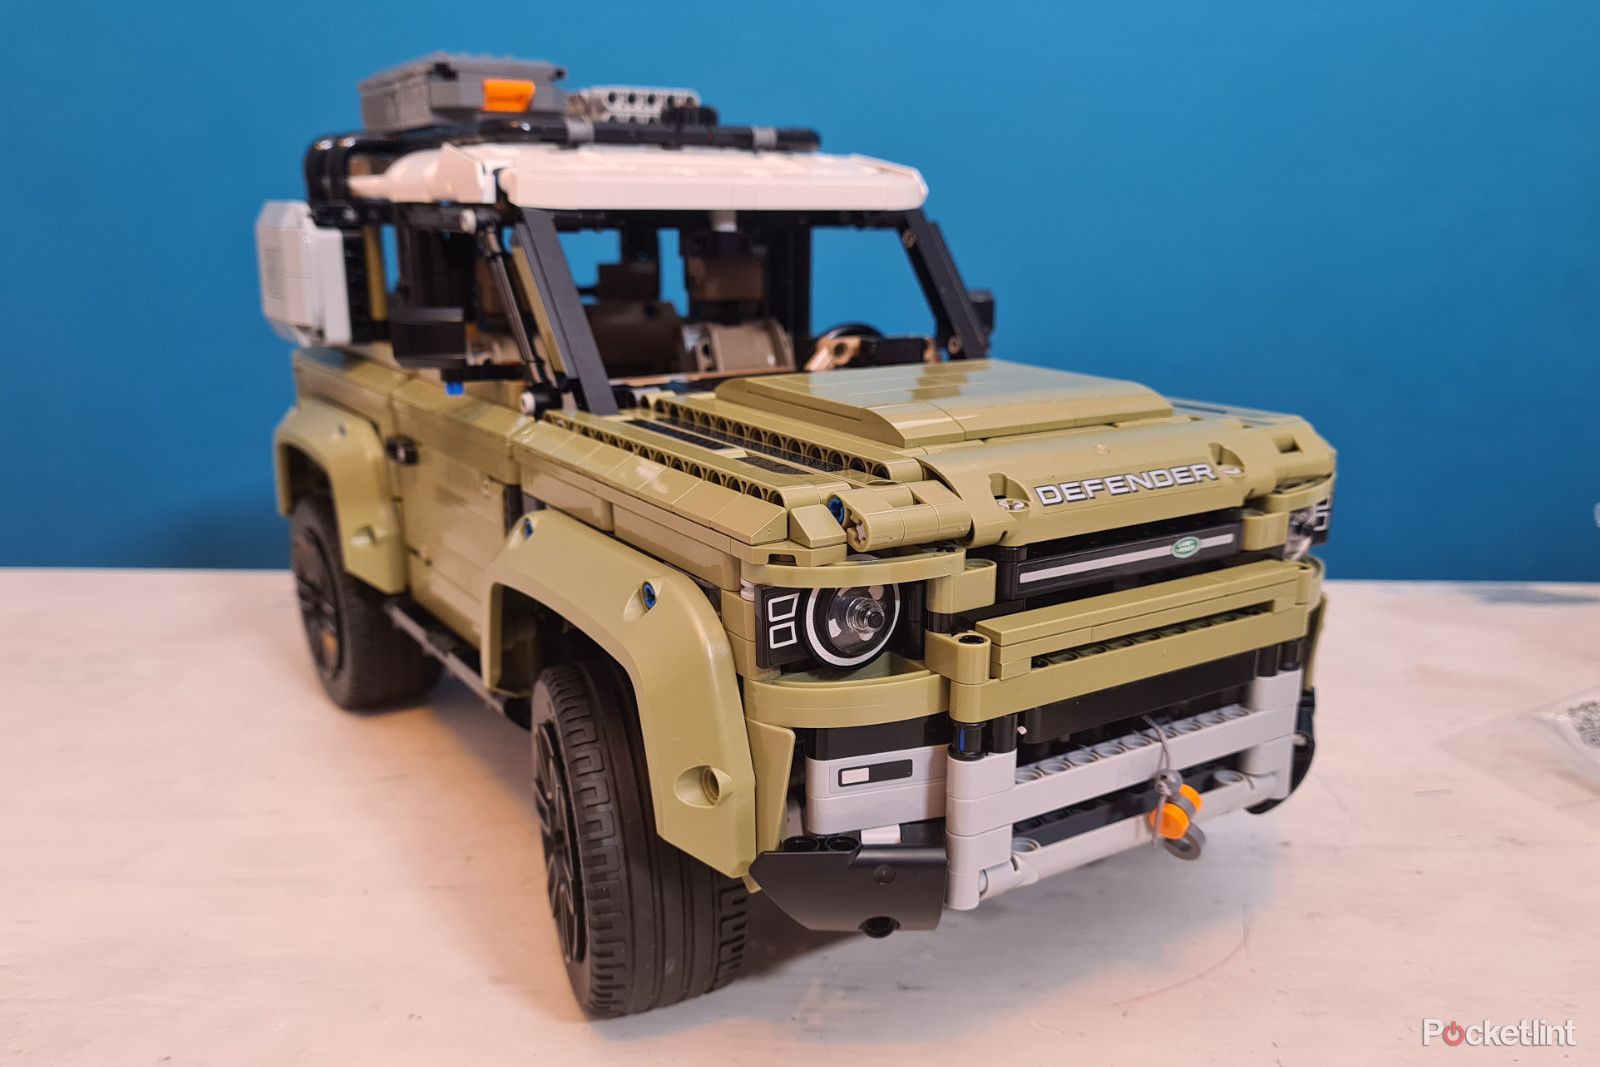 We built the Lego Technic Land Rover Defender, here's what the process was